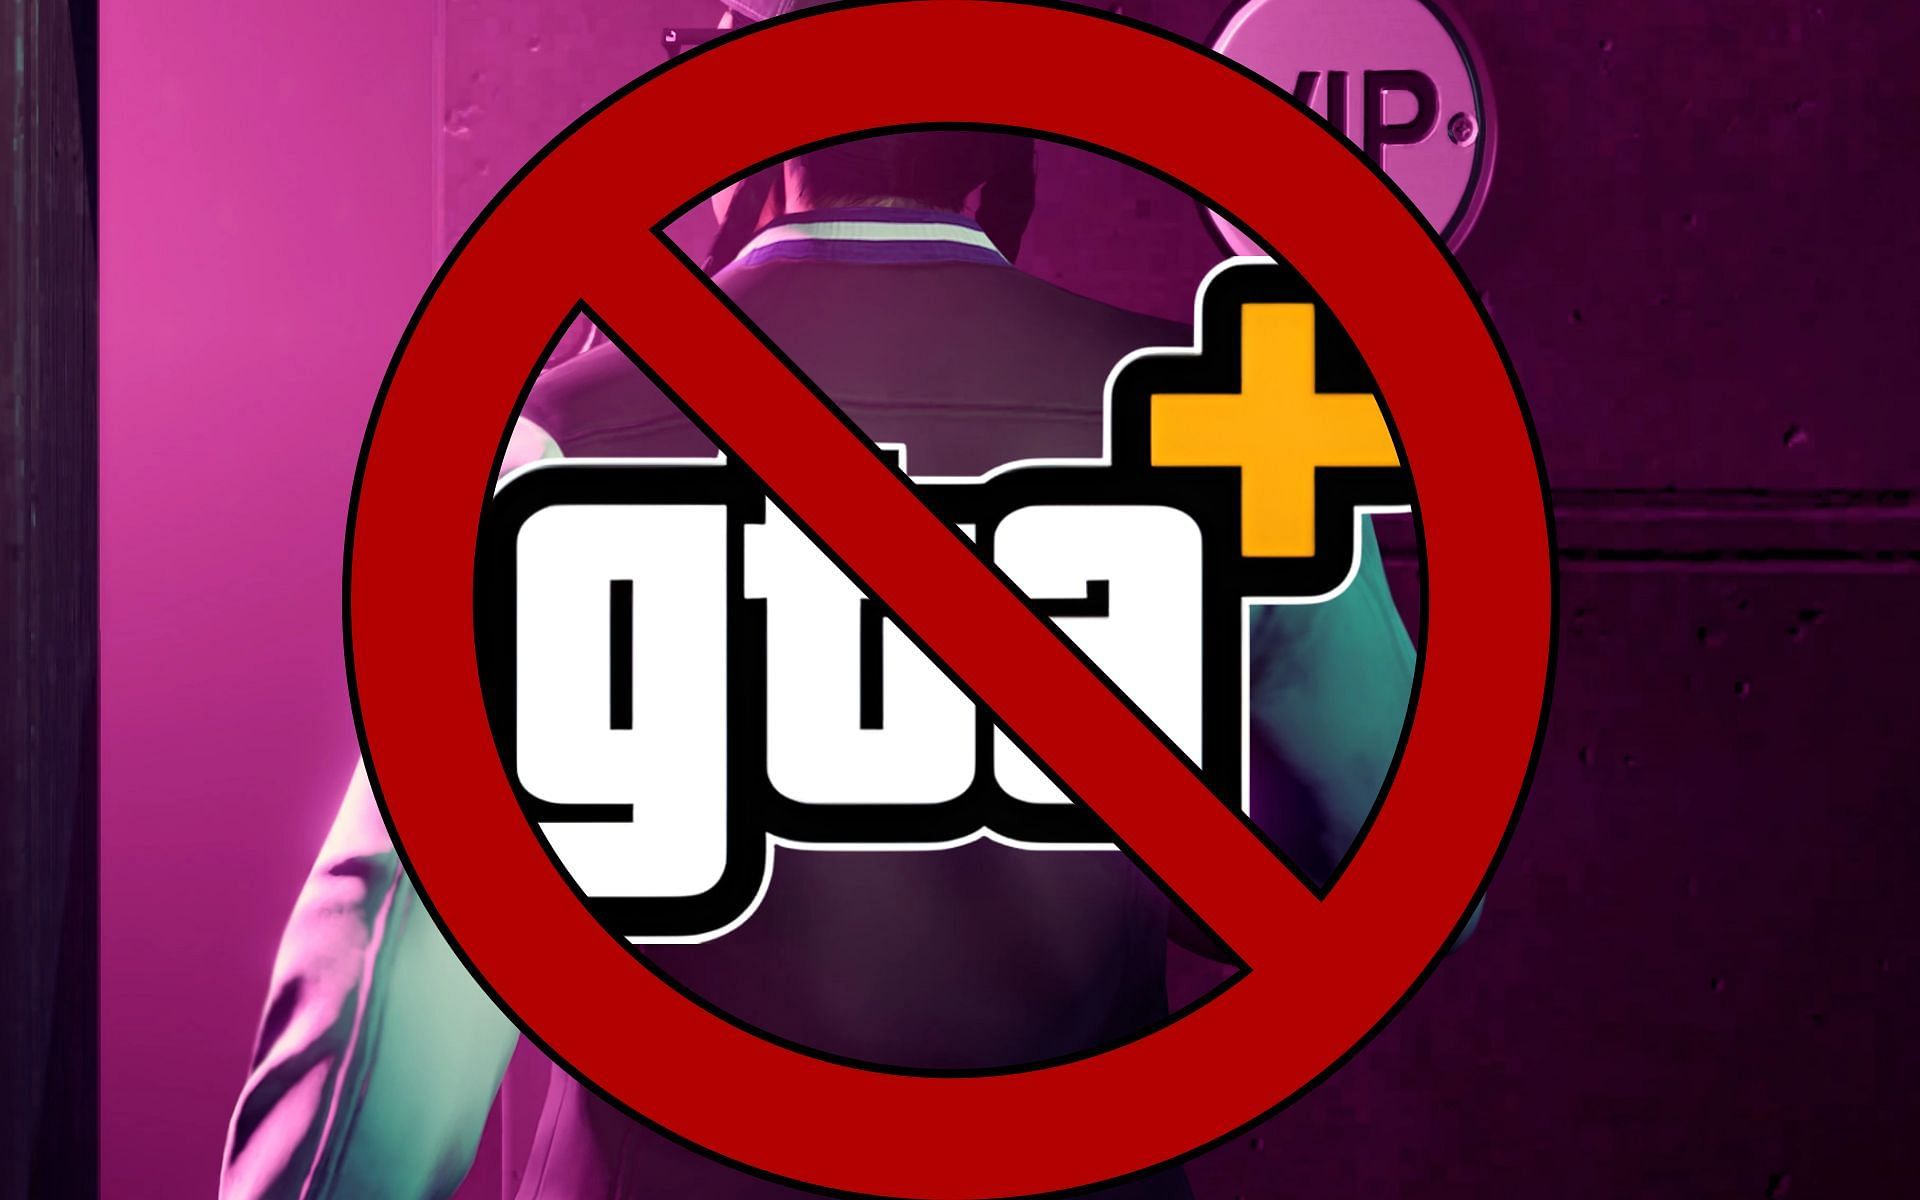 Some players are considering a &ldquo;protest&rdquo; in response to GTA Plus (Image via Rockstar Games)